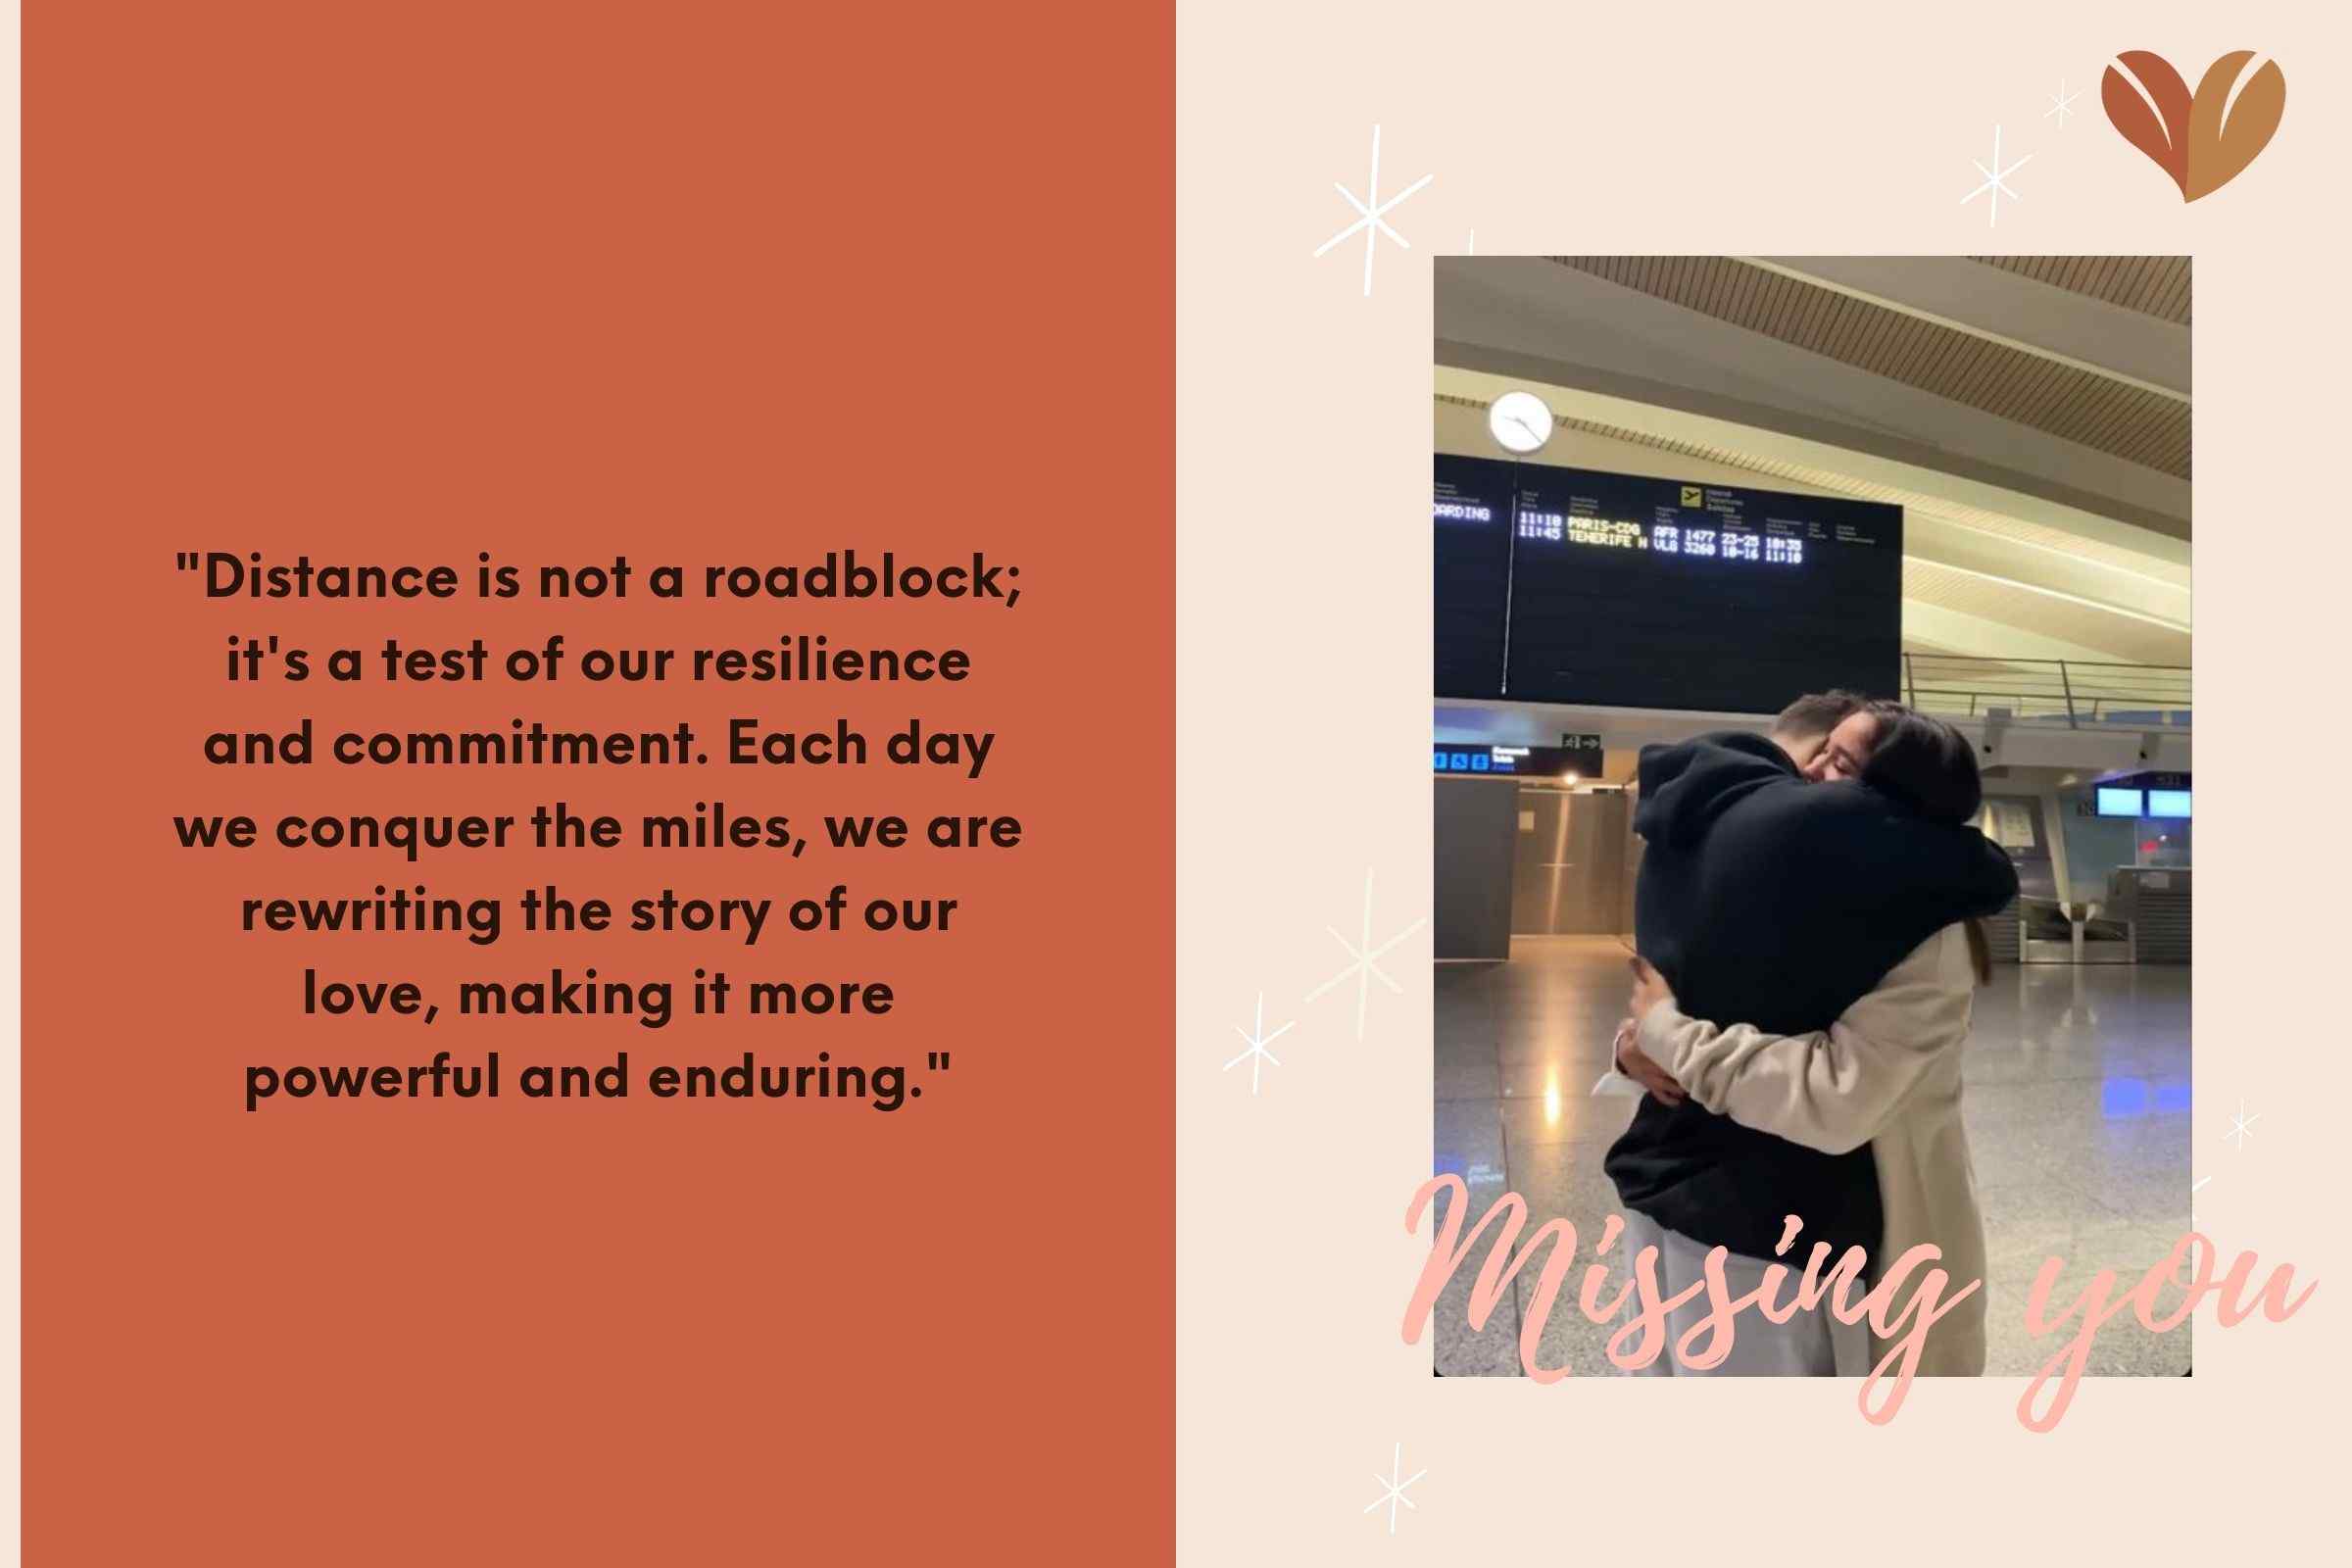 "Distance is not a roadblock; it's a test of our resilience and commitment. Each day we conquer the miles, we are rewriting the story of our love, making it more powerful and enduring."